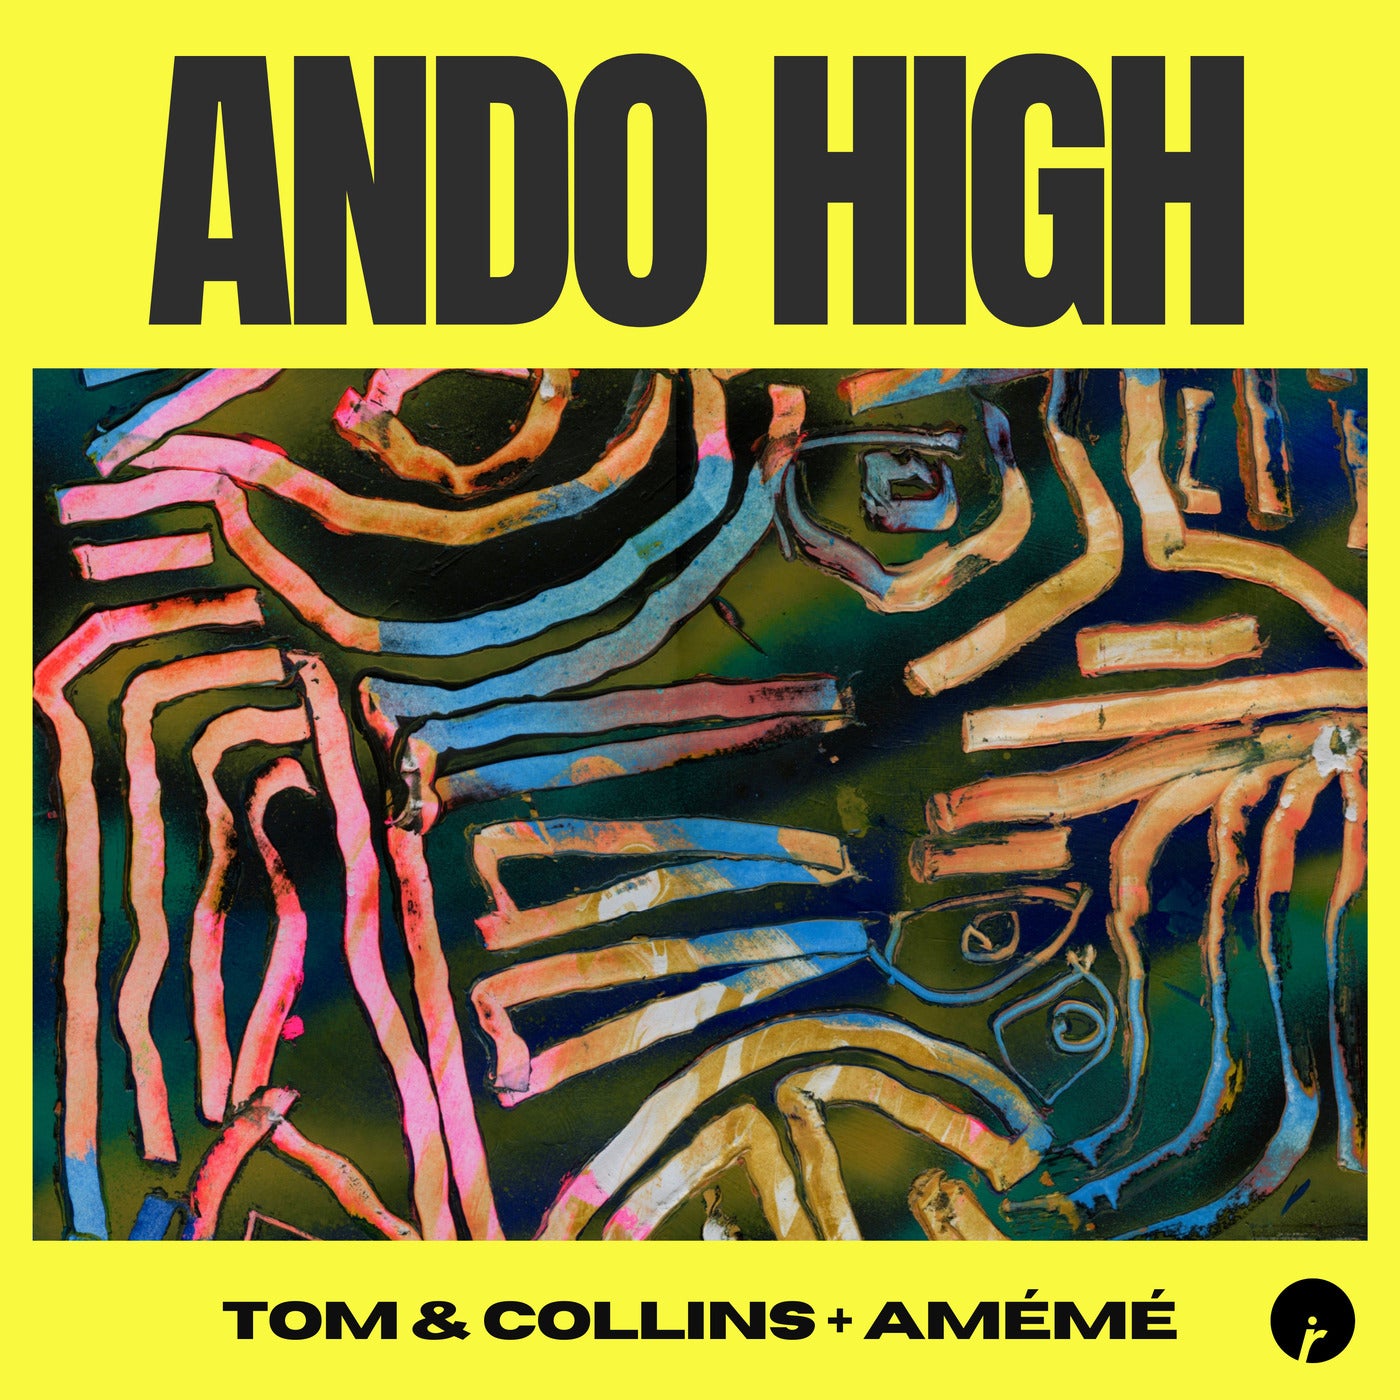 Tom & Collins, AMEME - Ando High on Insomniac Records